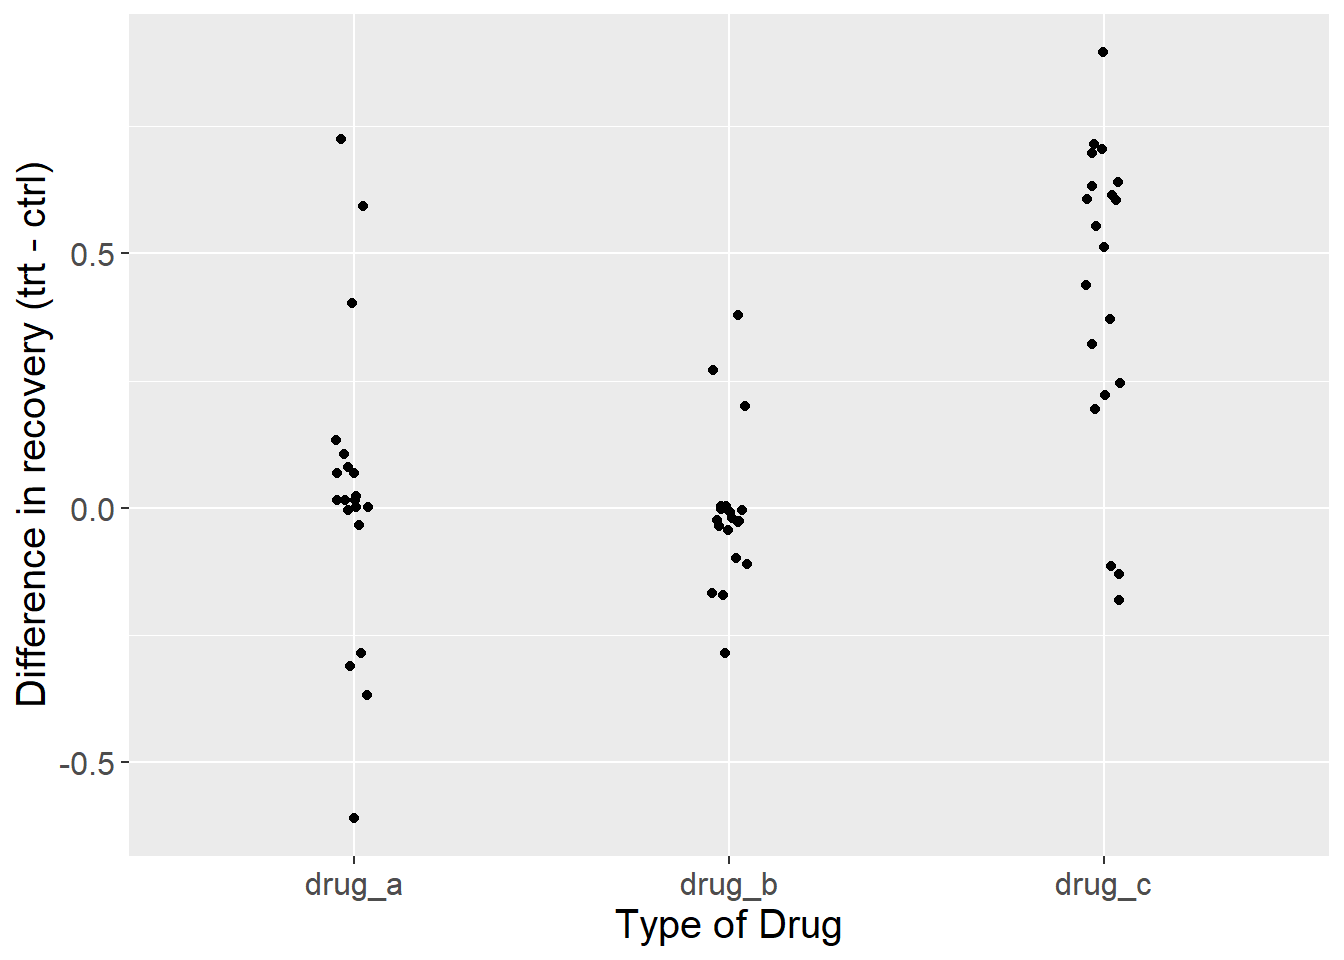 Difference in the proportion of patients that recovered from a disease after taking one of three drugs relative to controls. Each dot represents the outcome of a single experiment (i.e. trial).